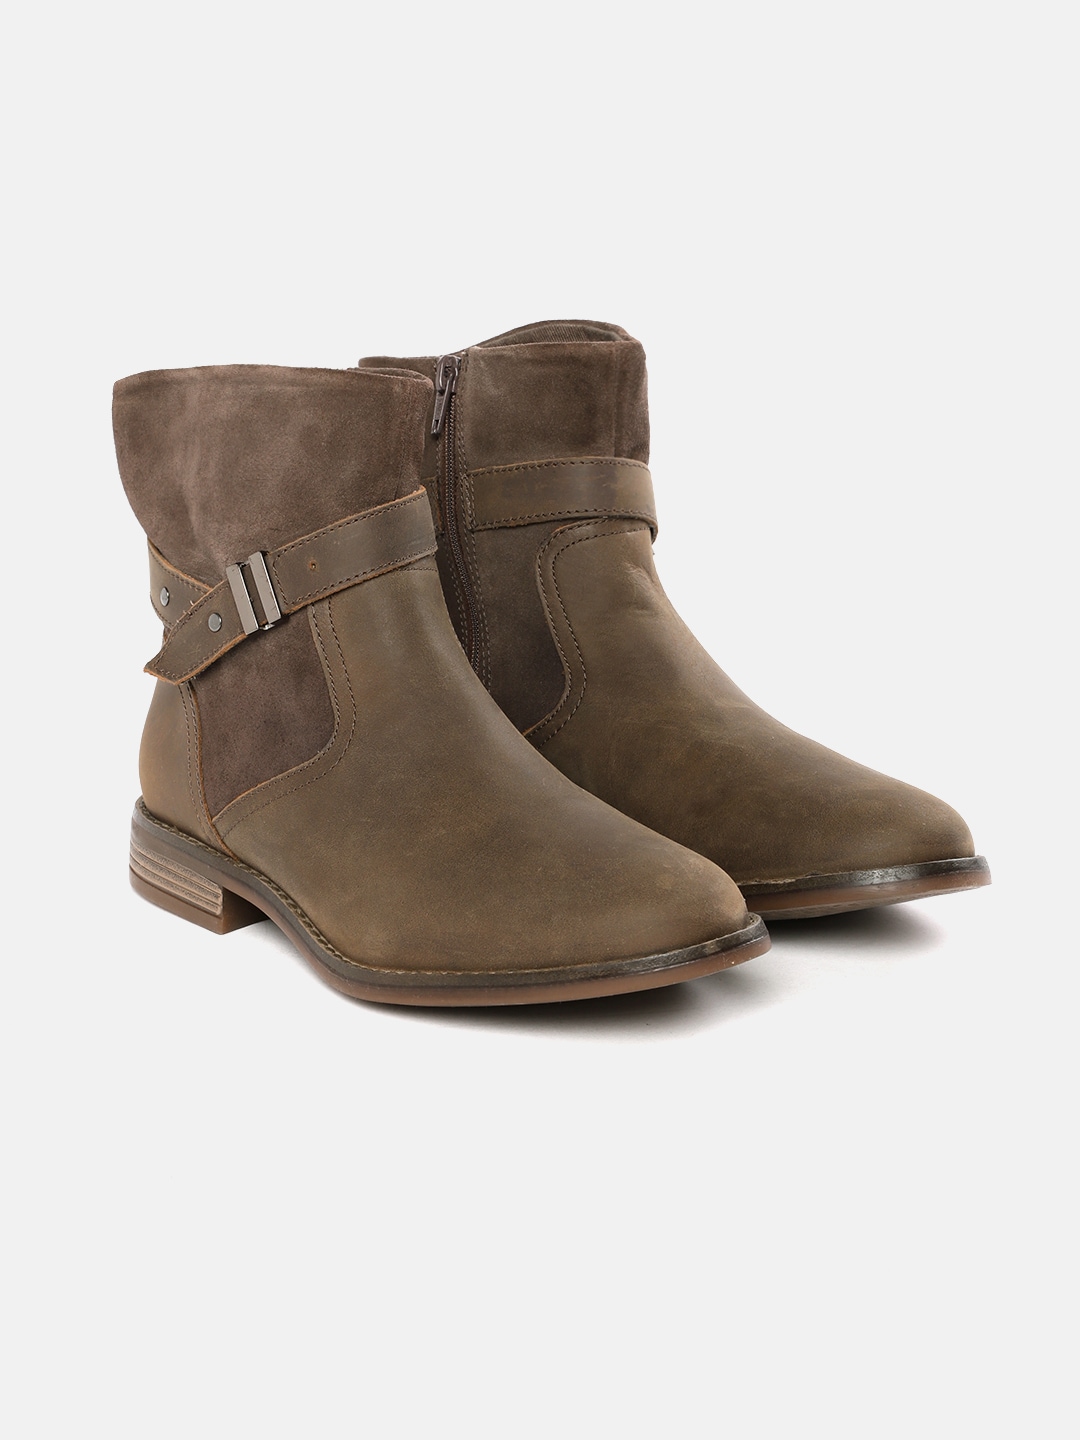 Clarks Women Taupe Solid Mid-Top Leather Regular Boots Price in India